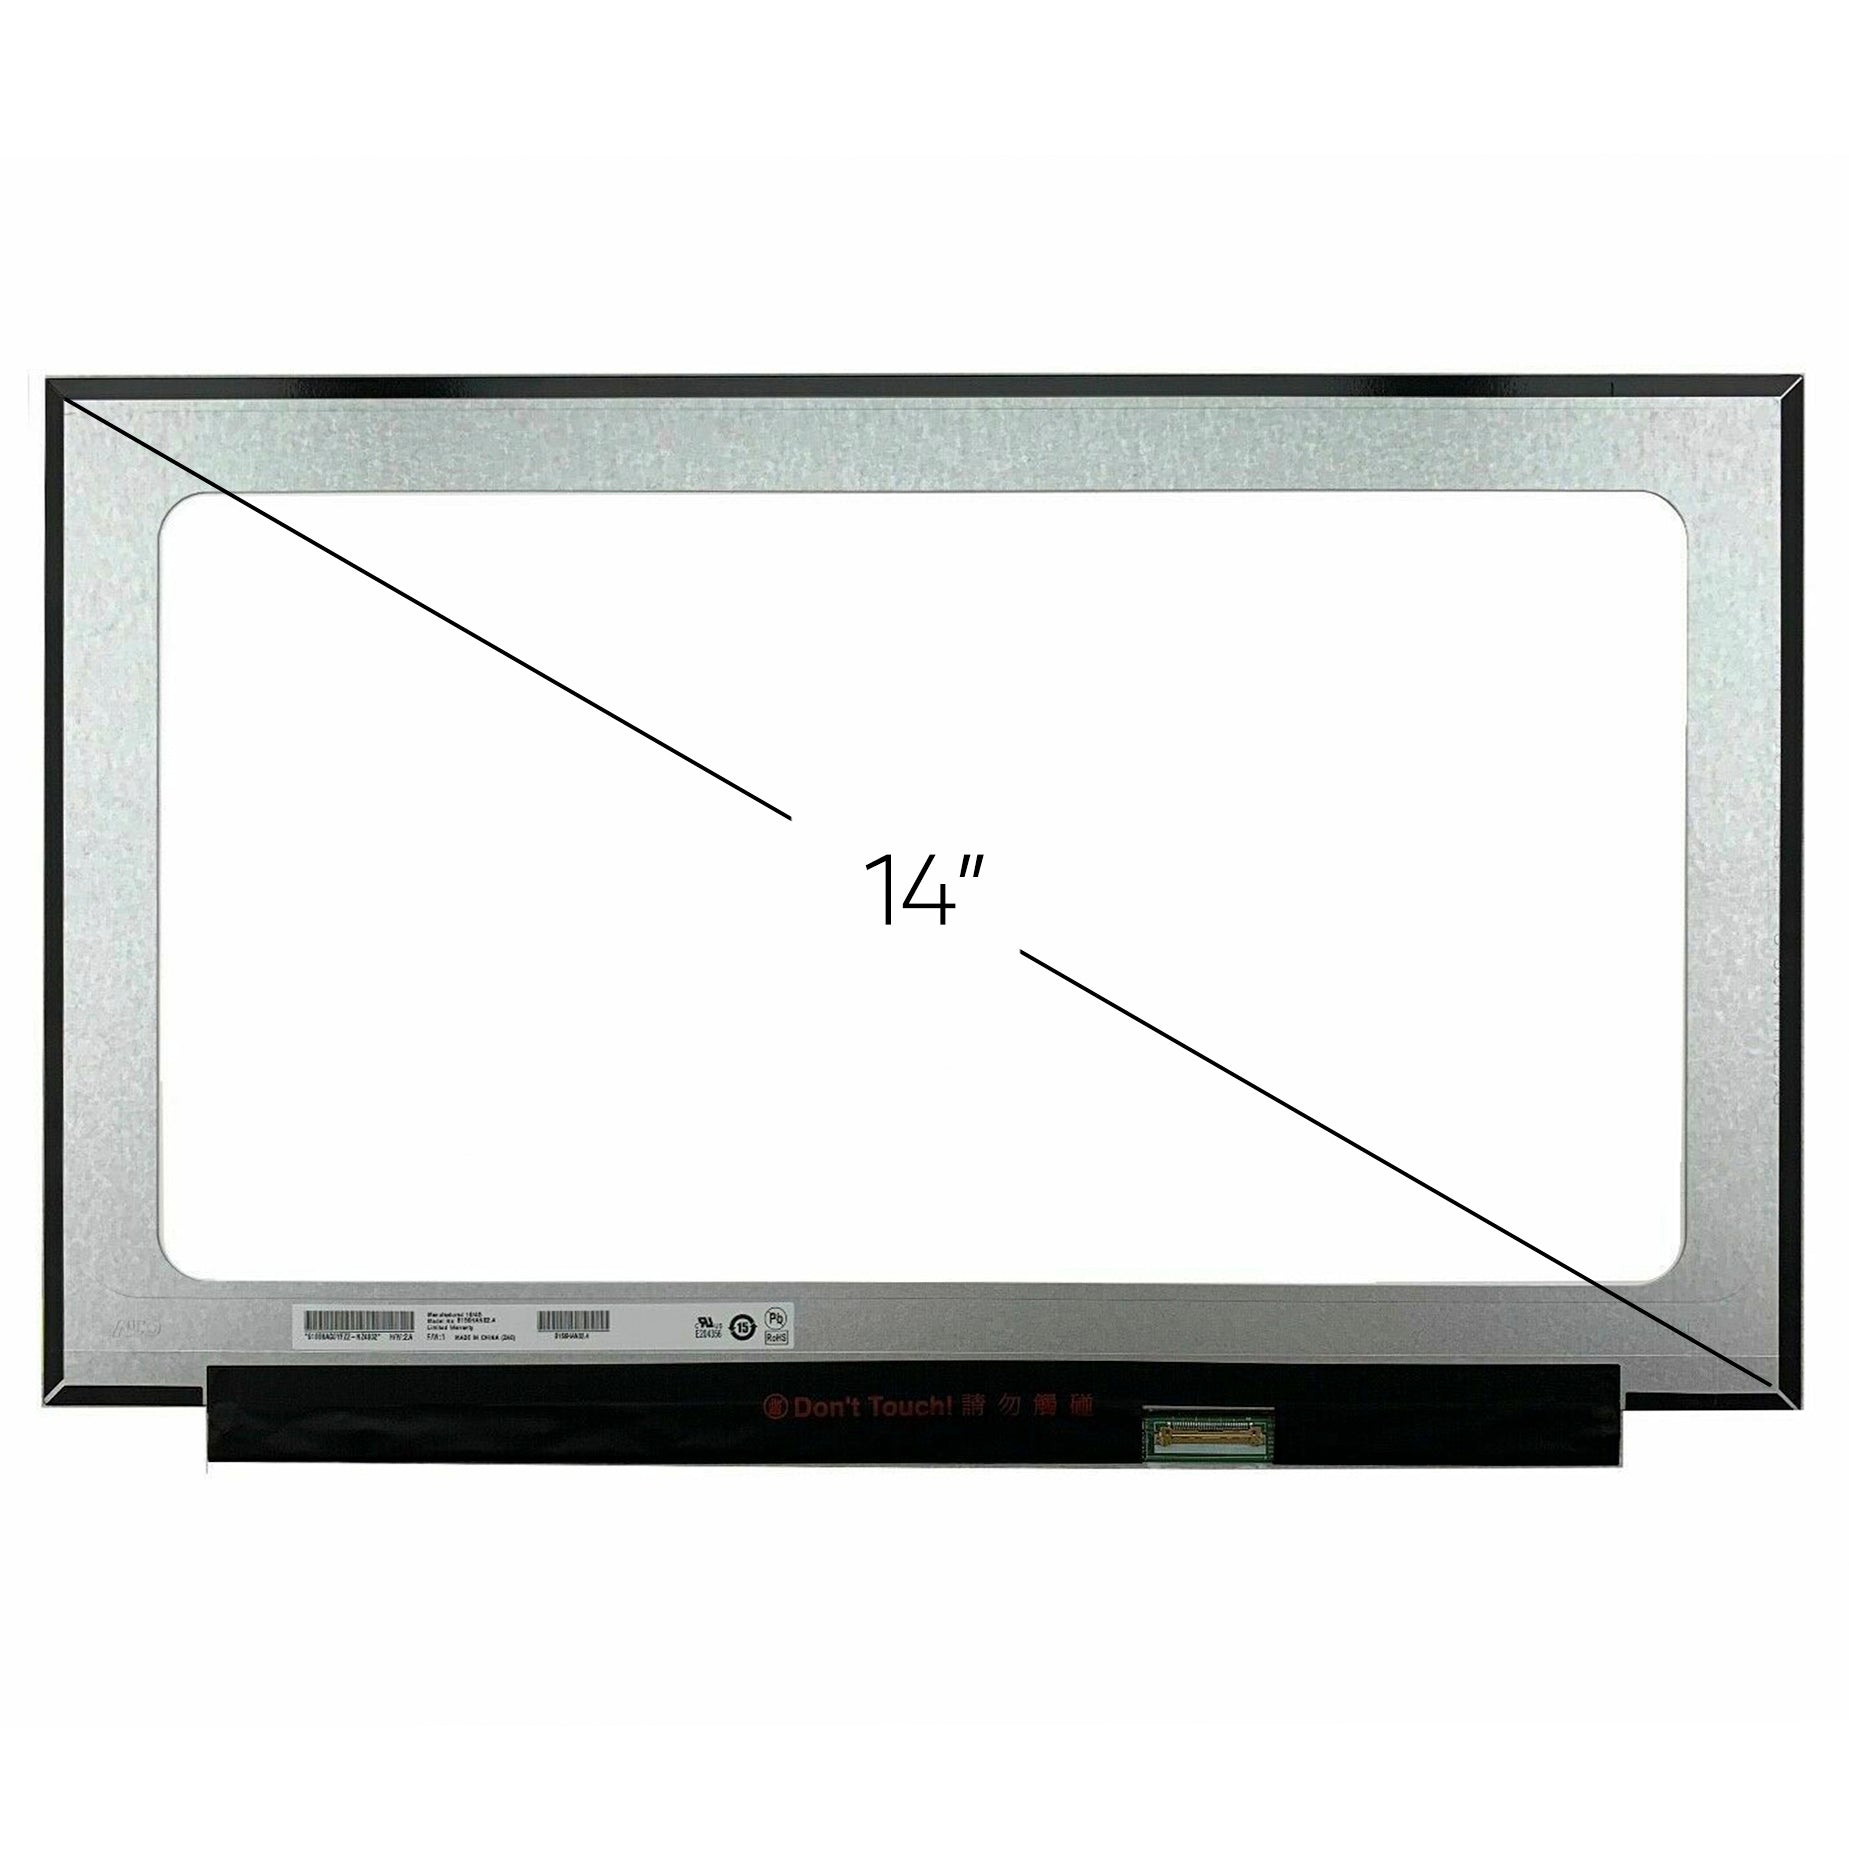 Screen Replacement for Lenovo PN 5D10M42871 HD 1366x768 LCD LED Display